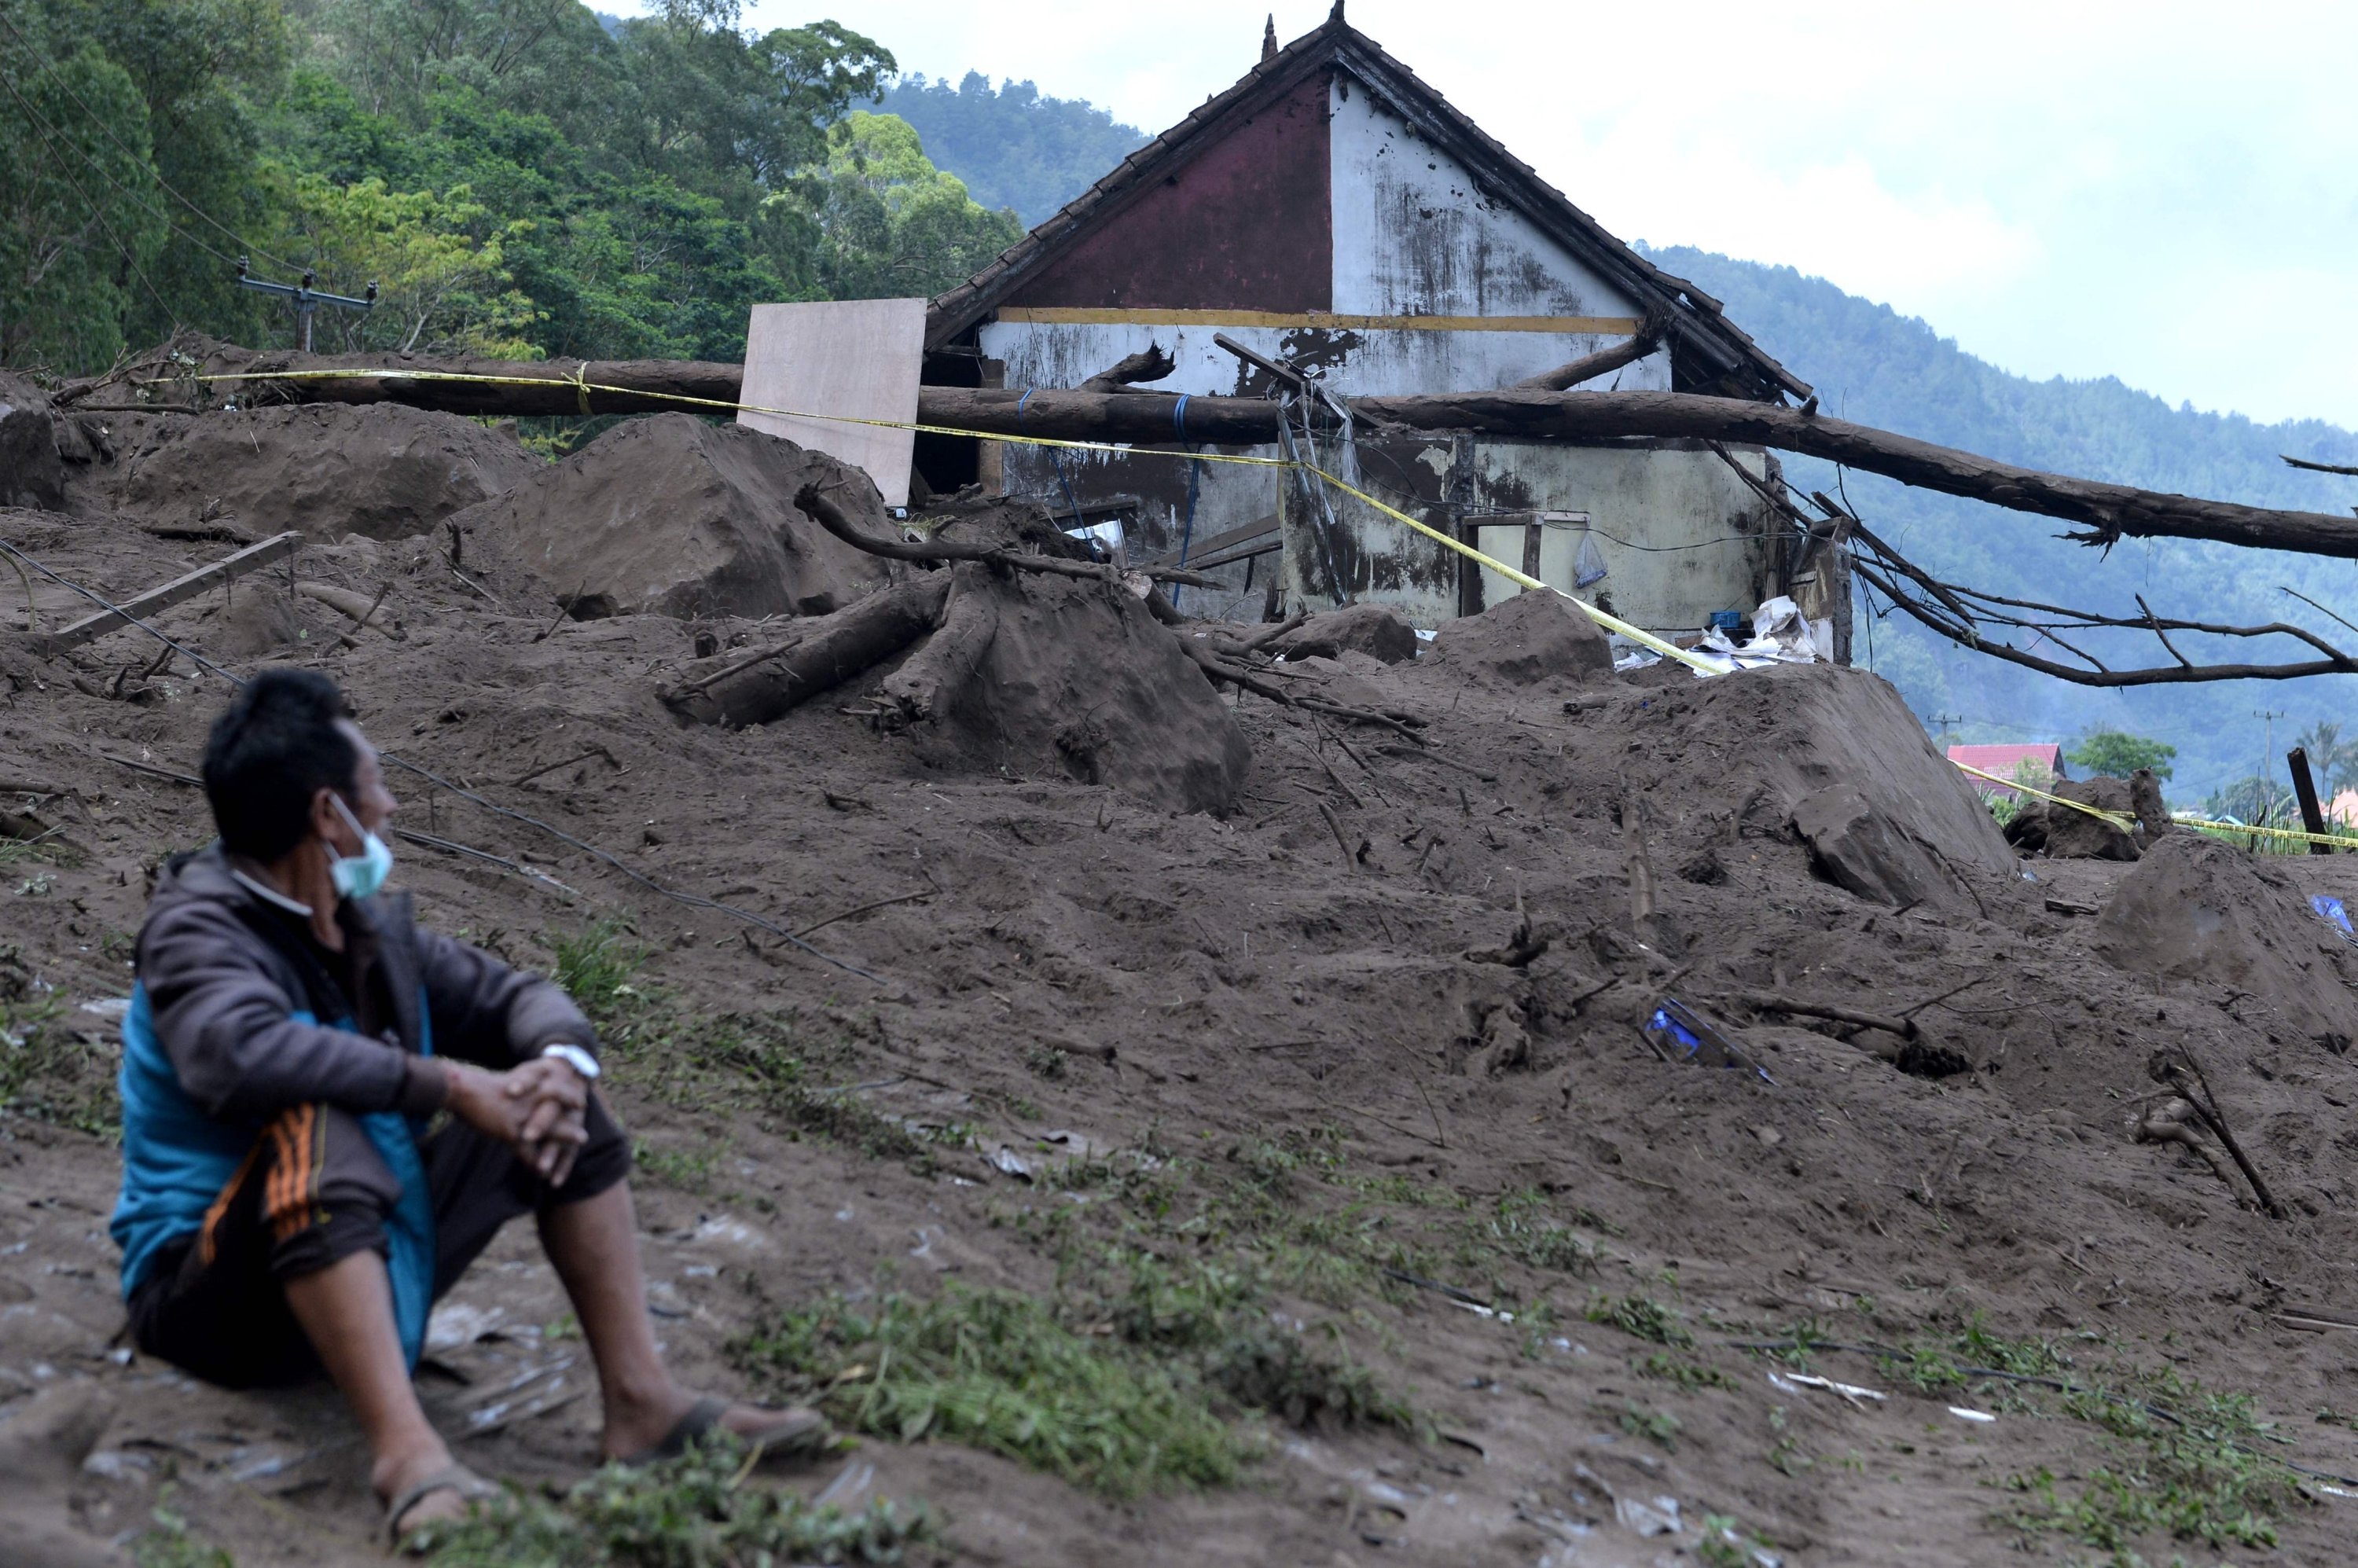 A resident sits near houses at the scene of a landslide triggered by a 4.8 magnitude earthquake at Trunyan village in Bangli, Indonesia